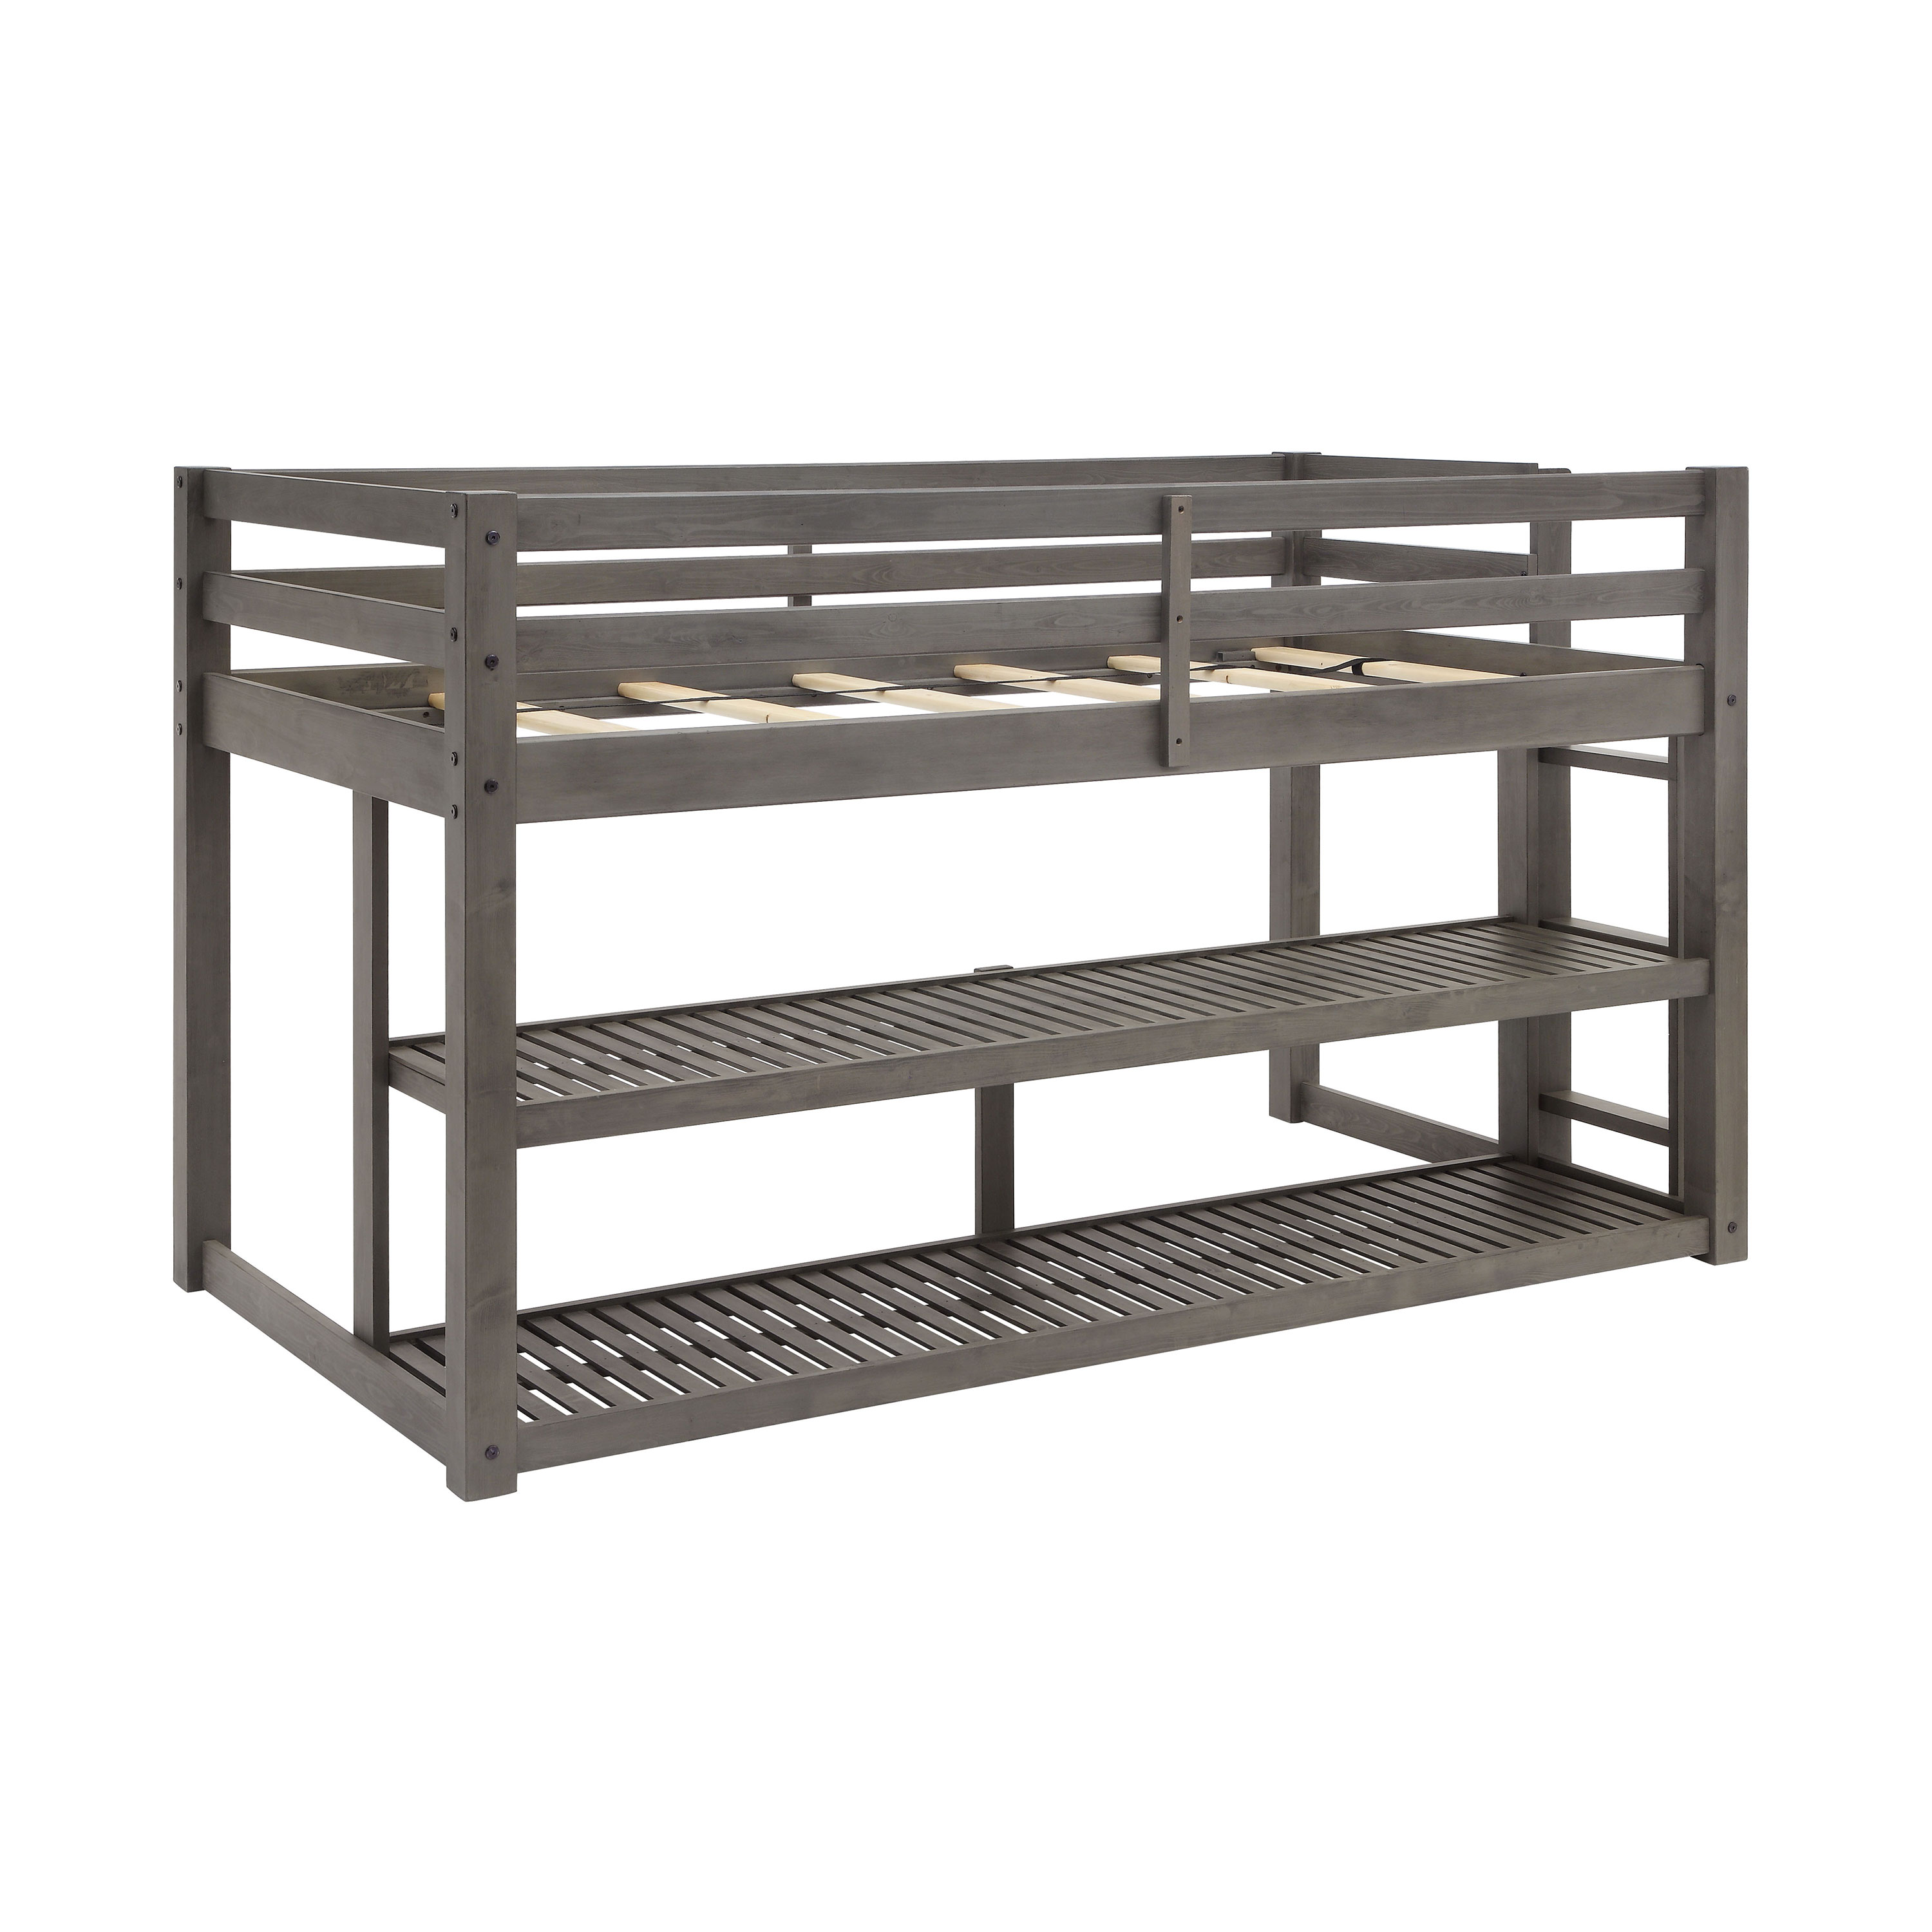 Better Homes and Gardens Greer Twin Loft Storage Bed, Gray - image 8 of 11